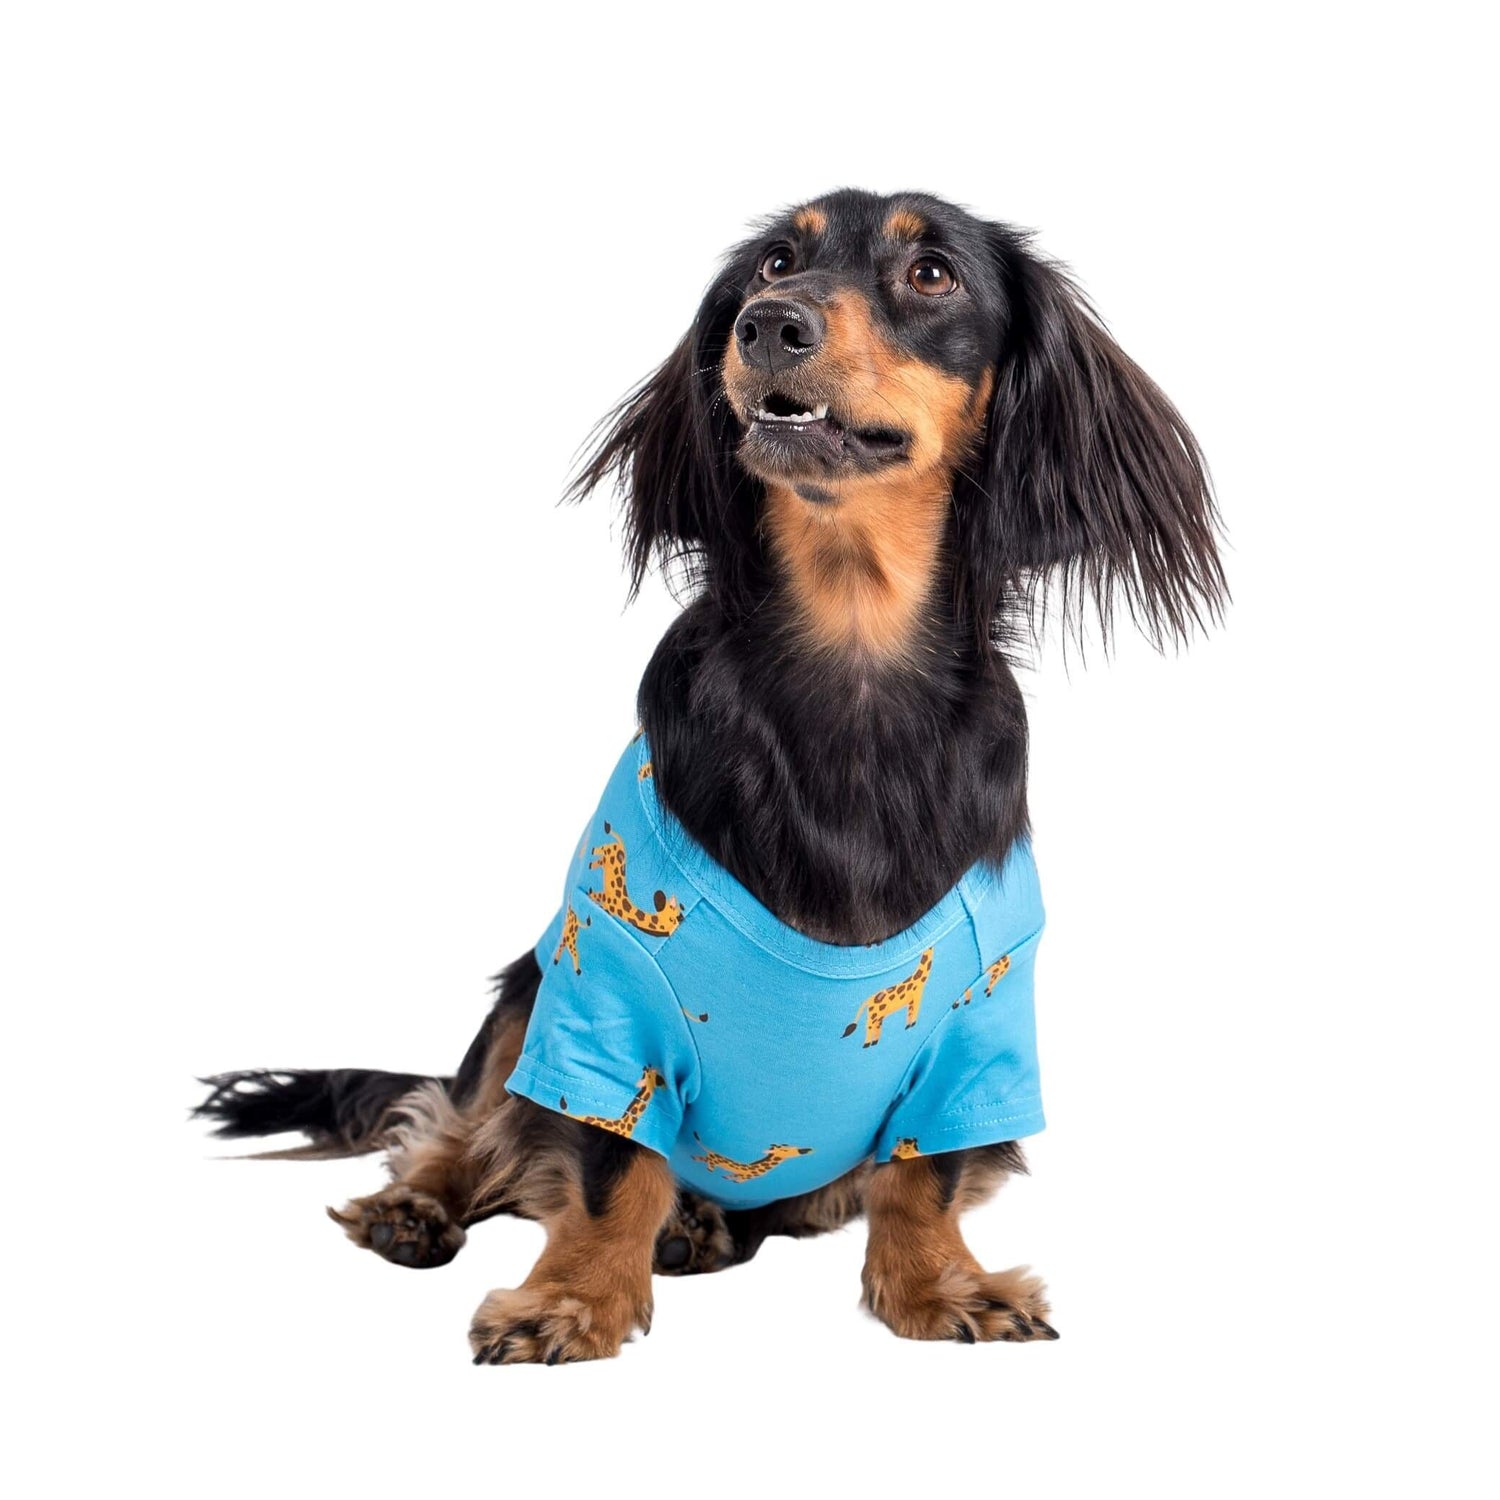 Ellie the Dachshund wearing Gerald the Giraffe dog pyjamas made by Vibrant Hound. The dog pyjamas are blue, with girrafes printed on them.